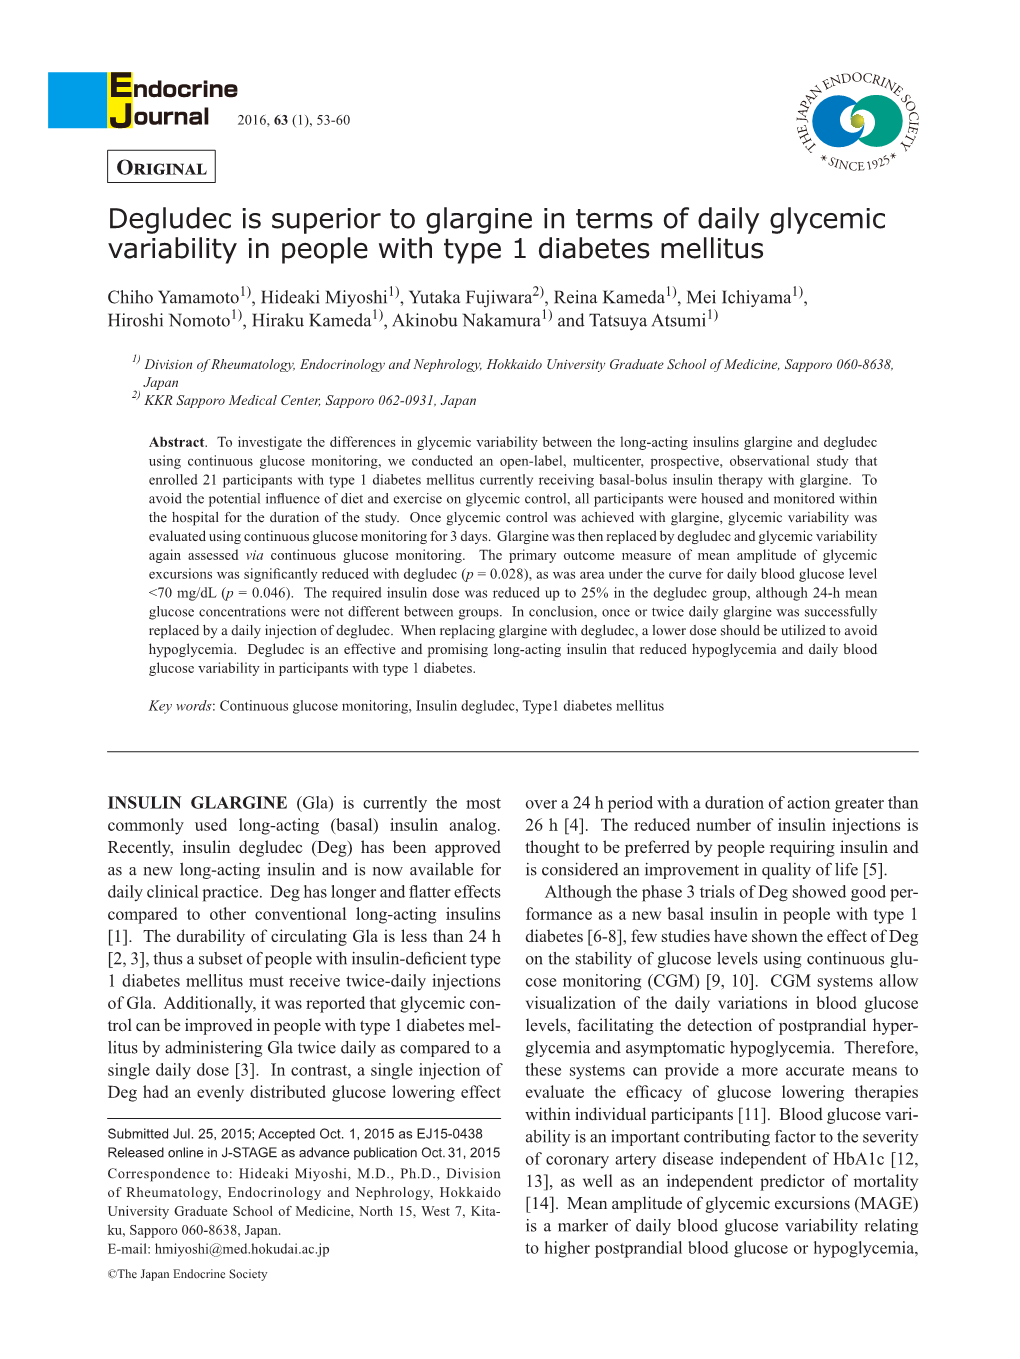 Degludec Is Superior to Glargine in Terms of Daily Glycemic Variability in People with Type 1 Diabetes Mellitus